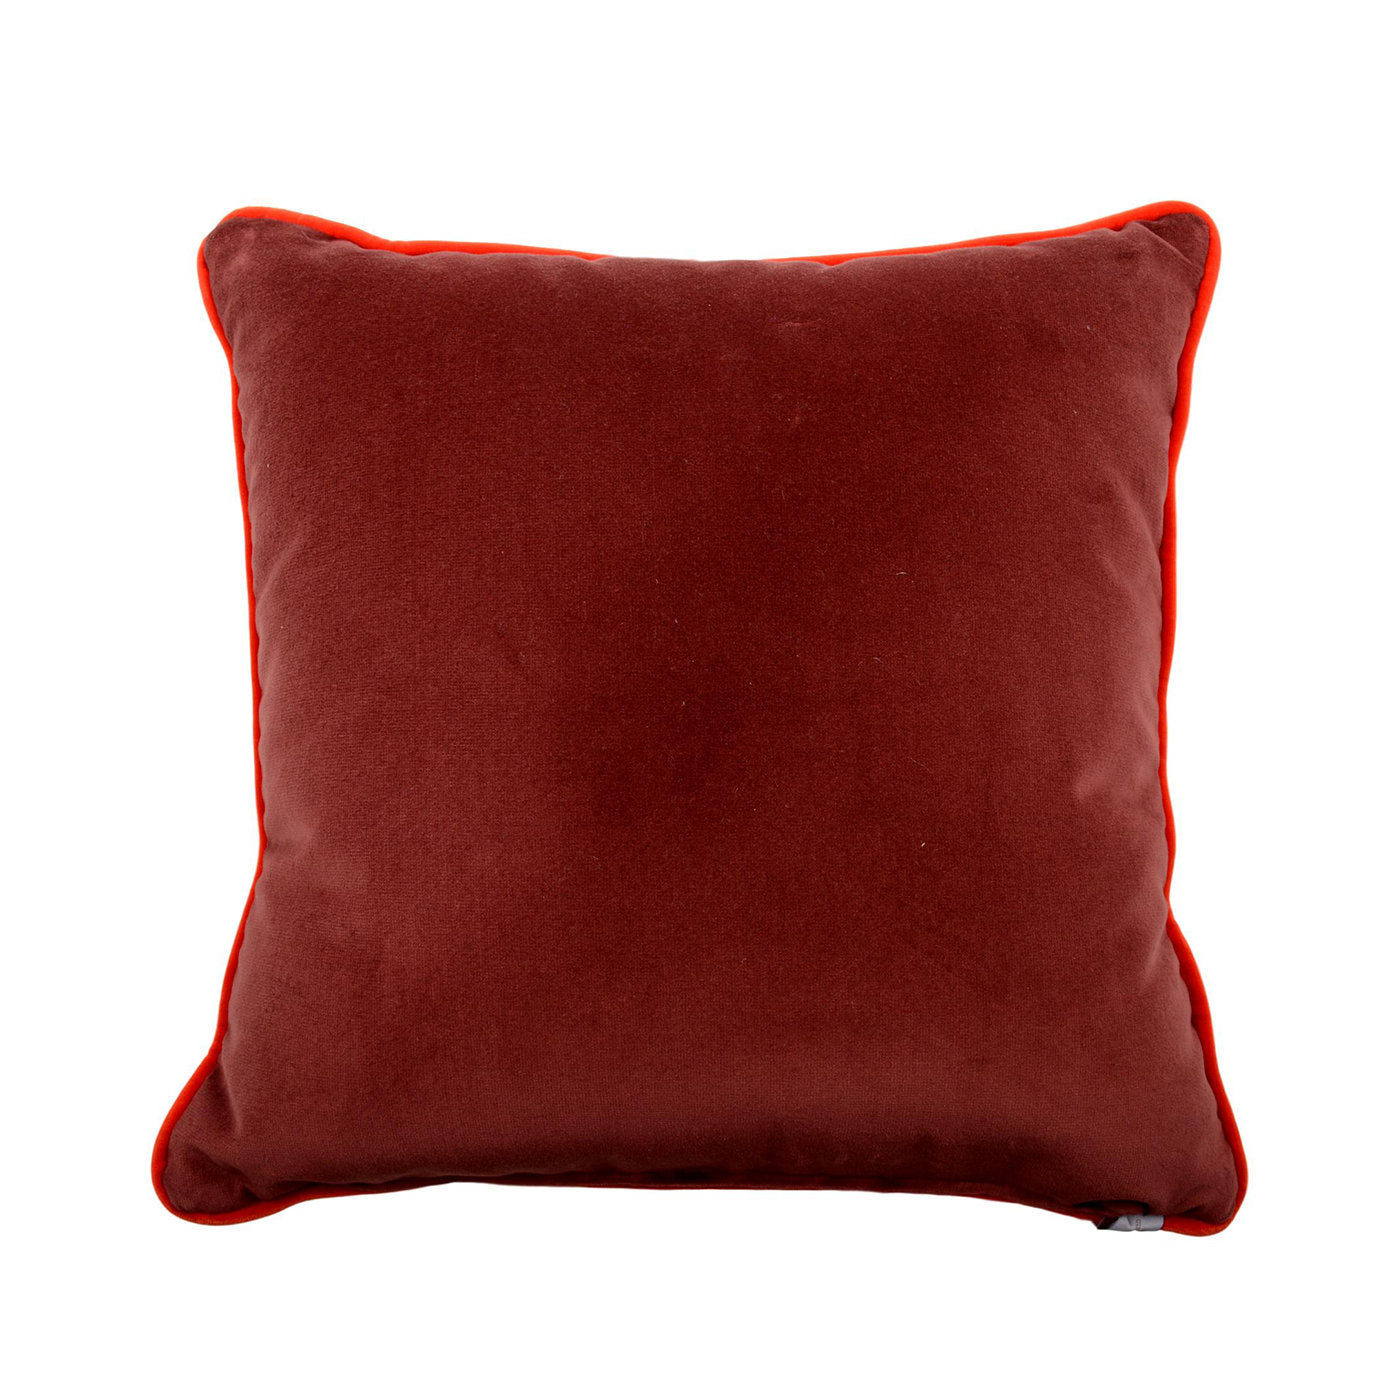 Red Carrè Cushion in micro patterned jacquard fabric - Alternative view 2